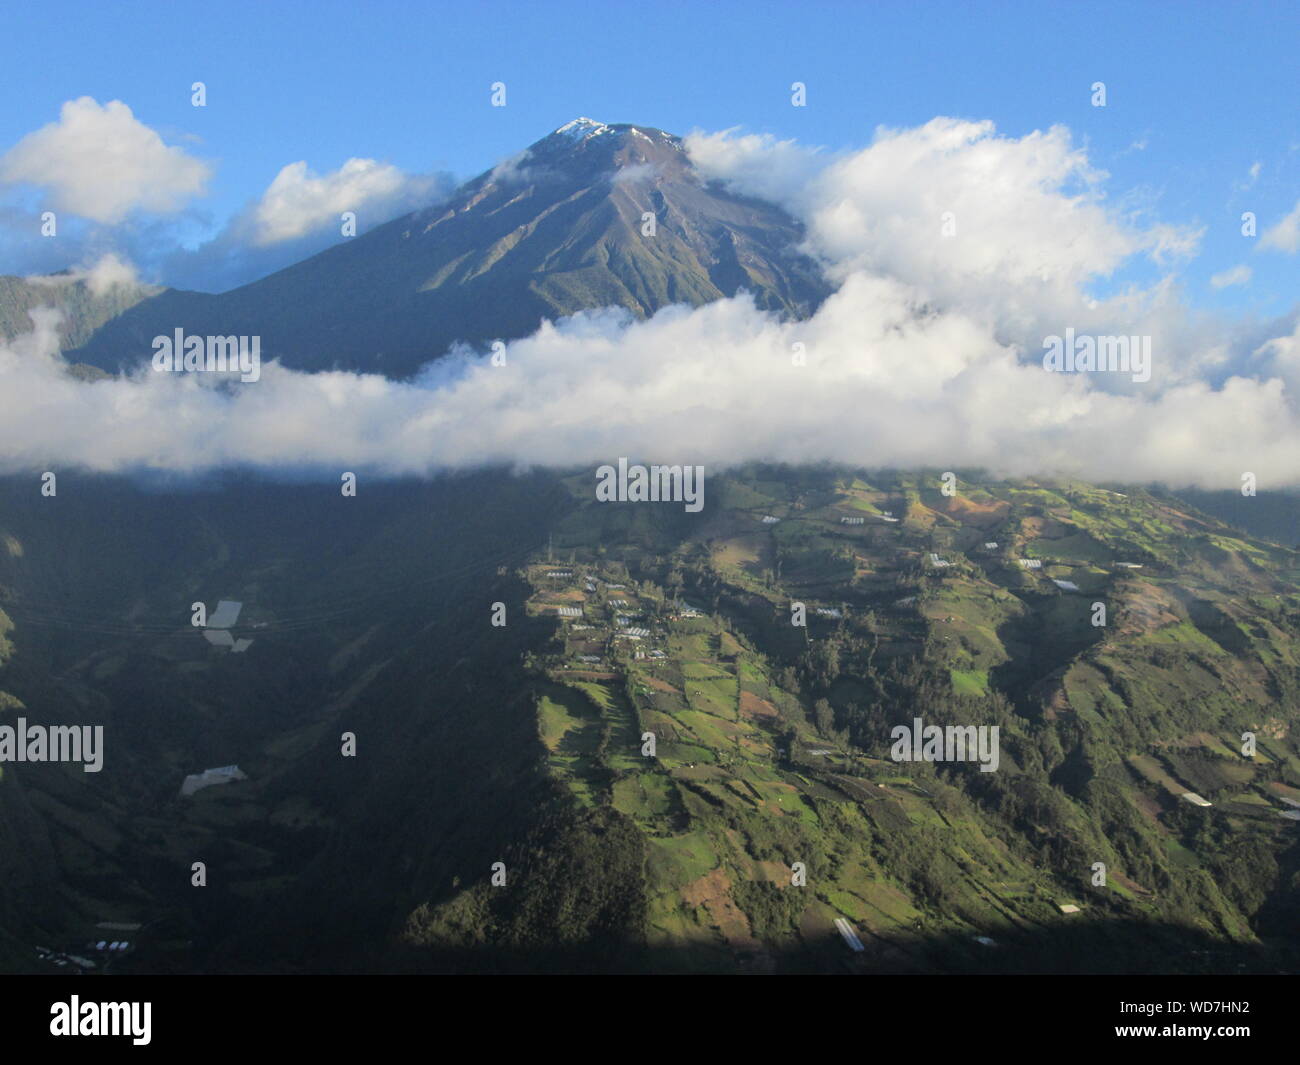 High View Of Mountain Peak Surrounded By Clouds Stock Photo